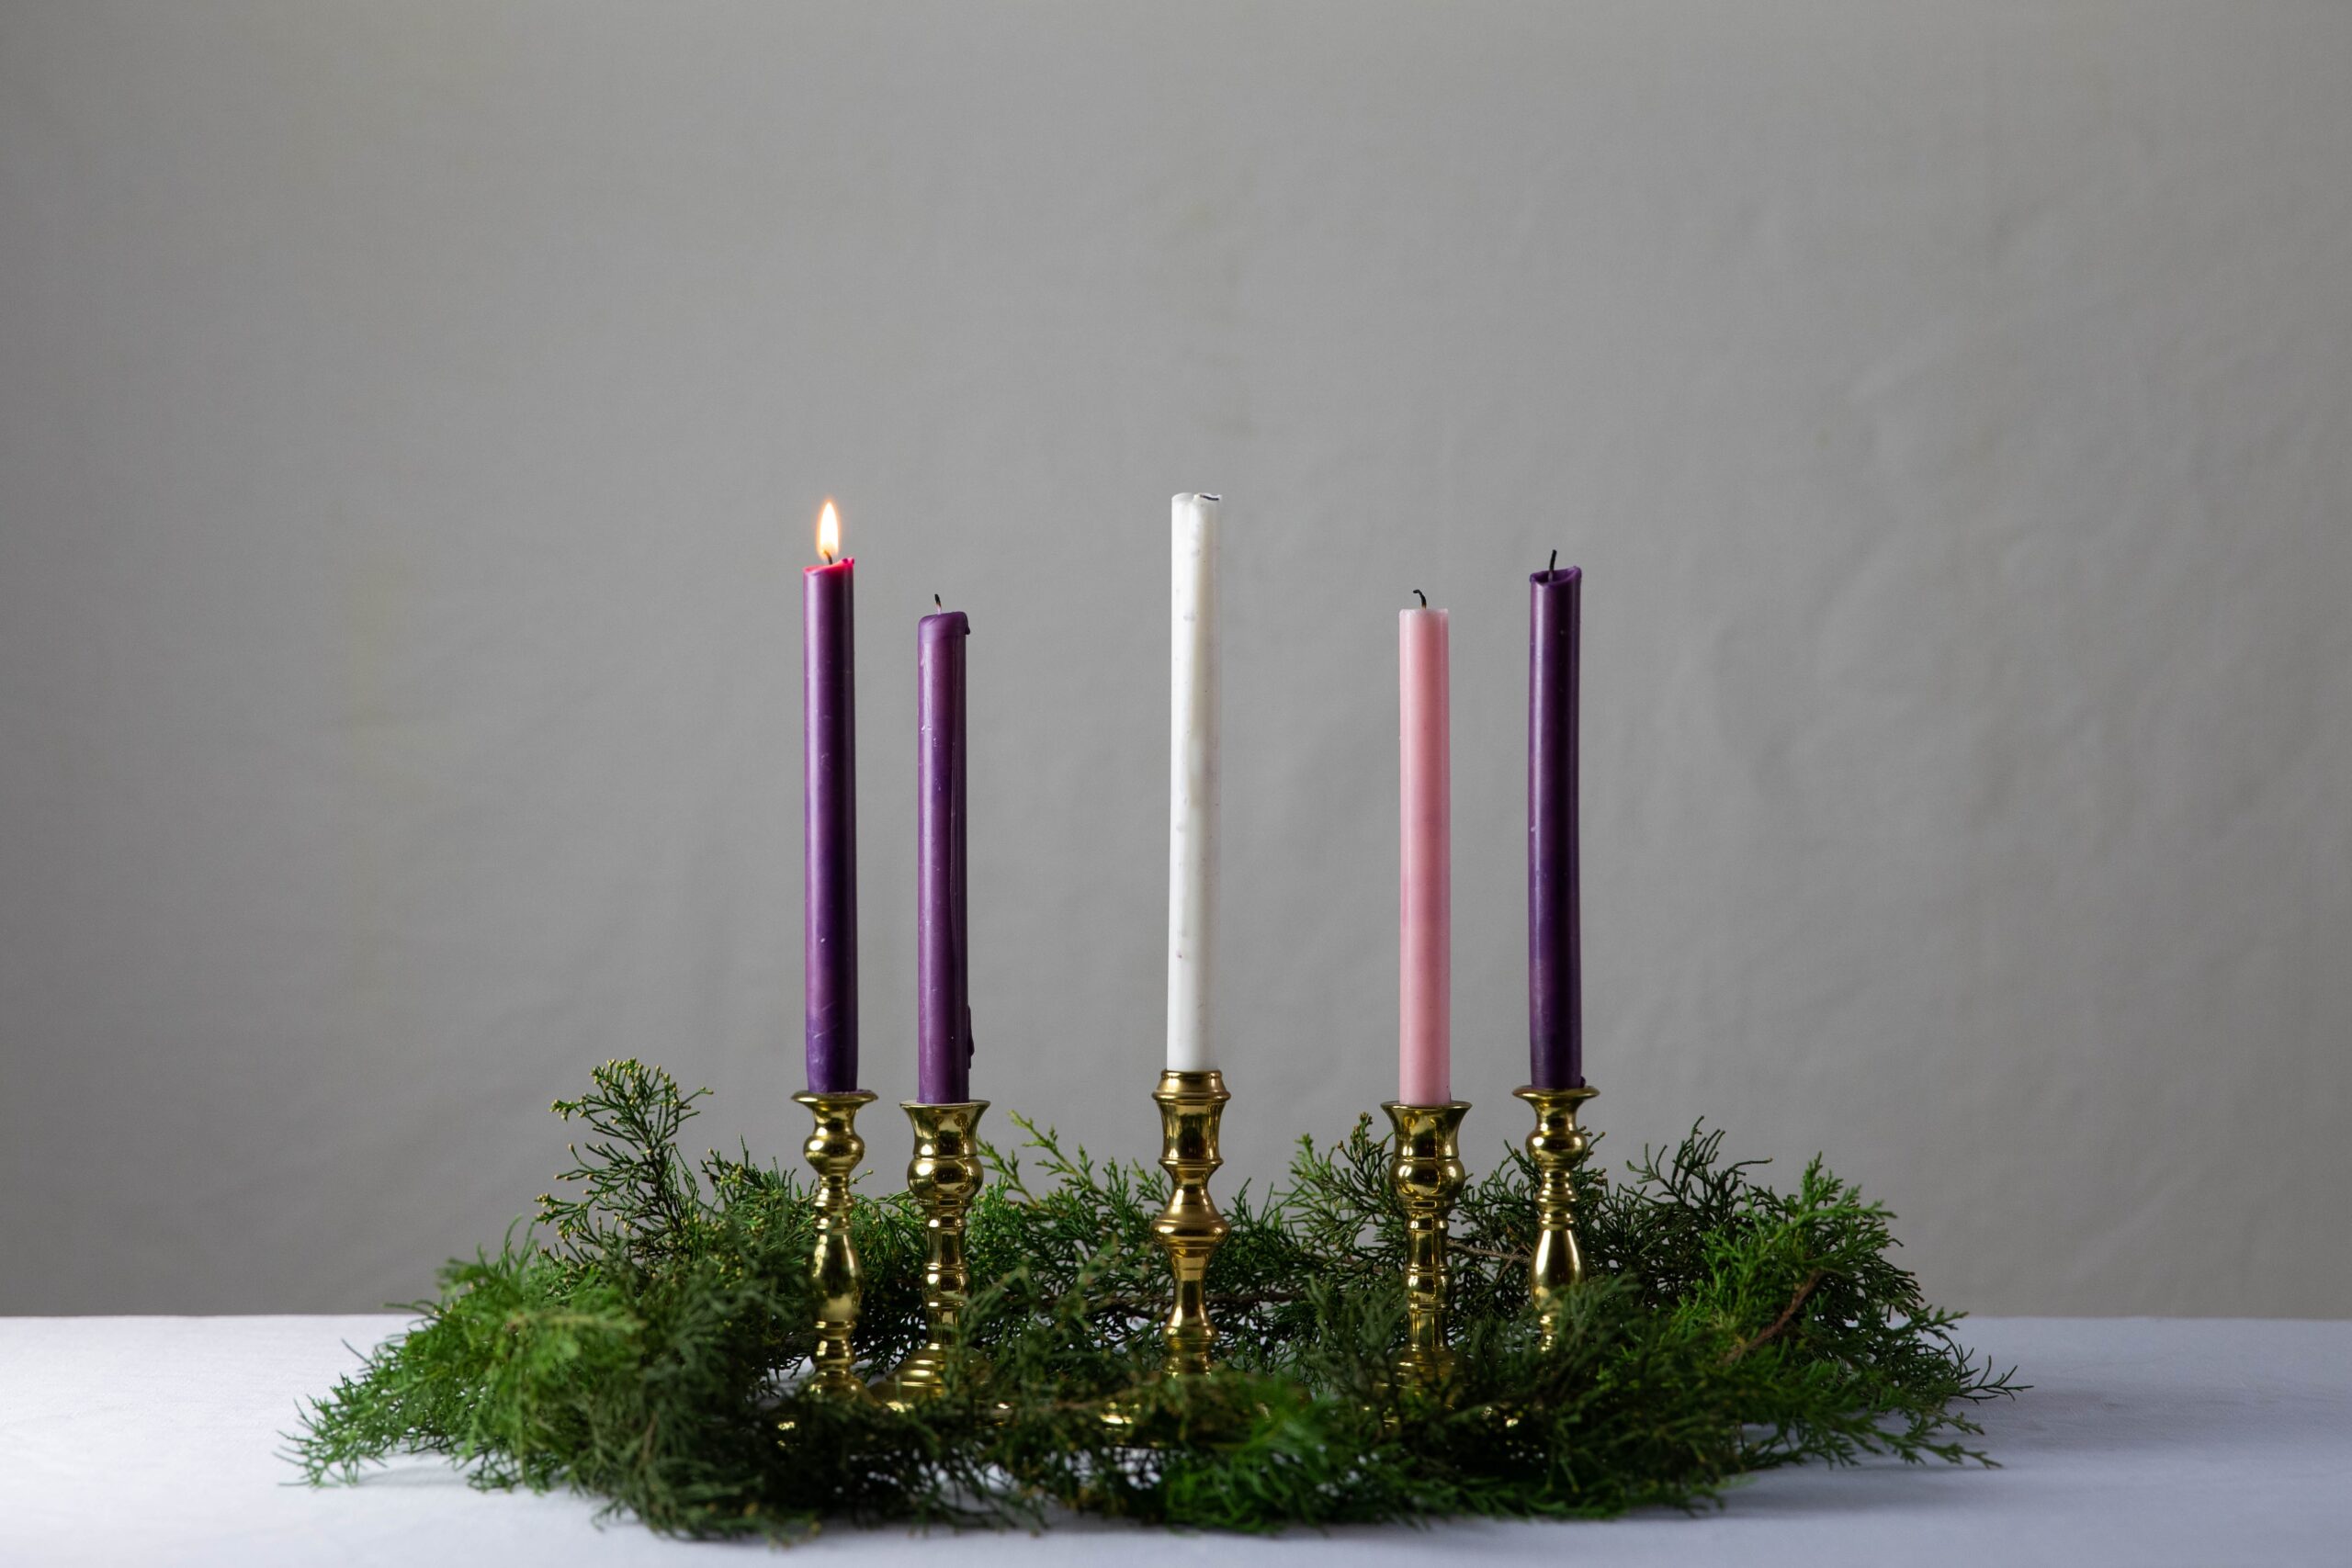 Advent wreath with the first candle lit, signifying Advent I (the first week of Advent)